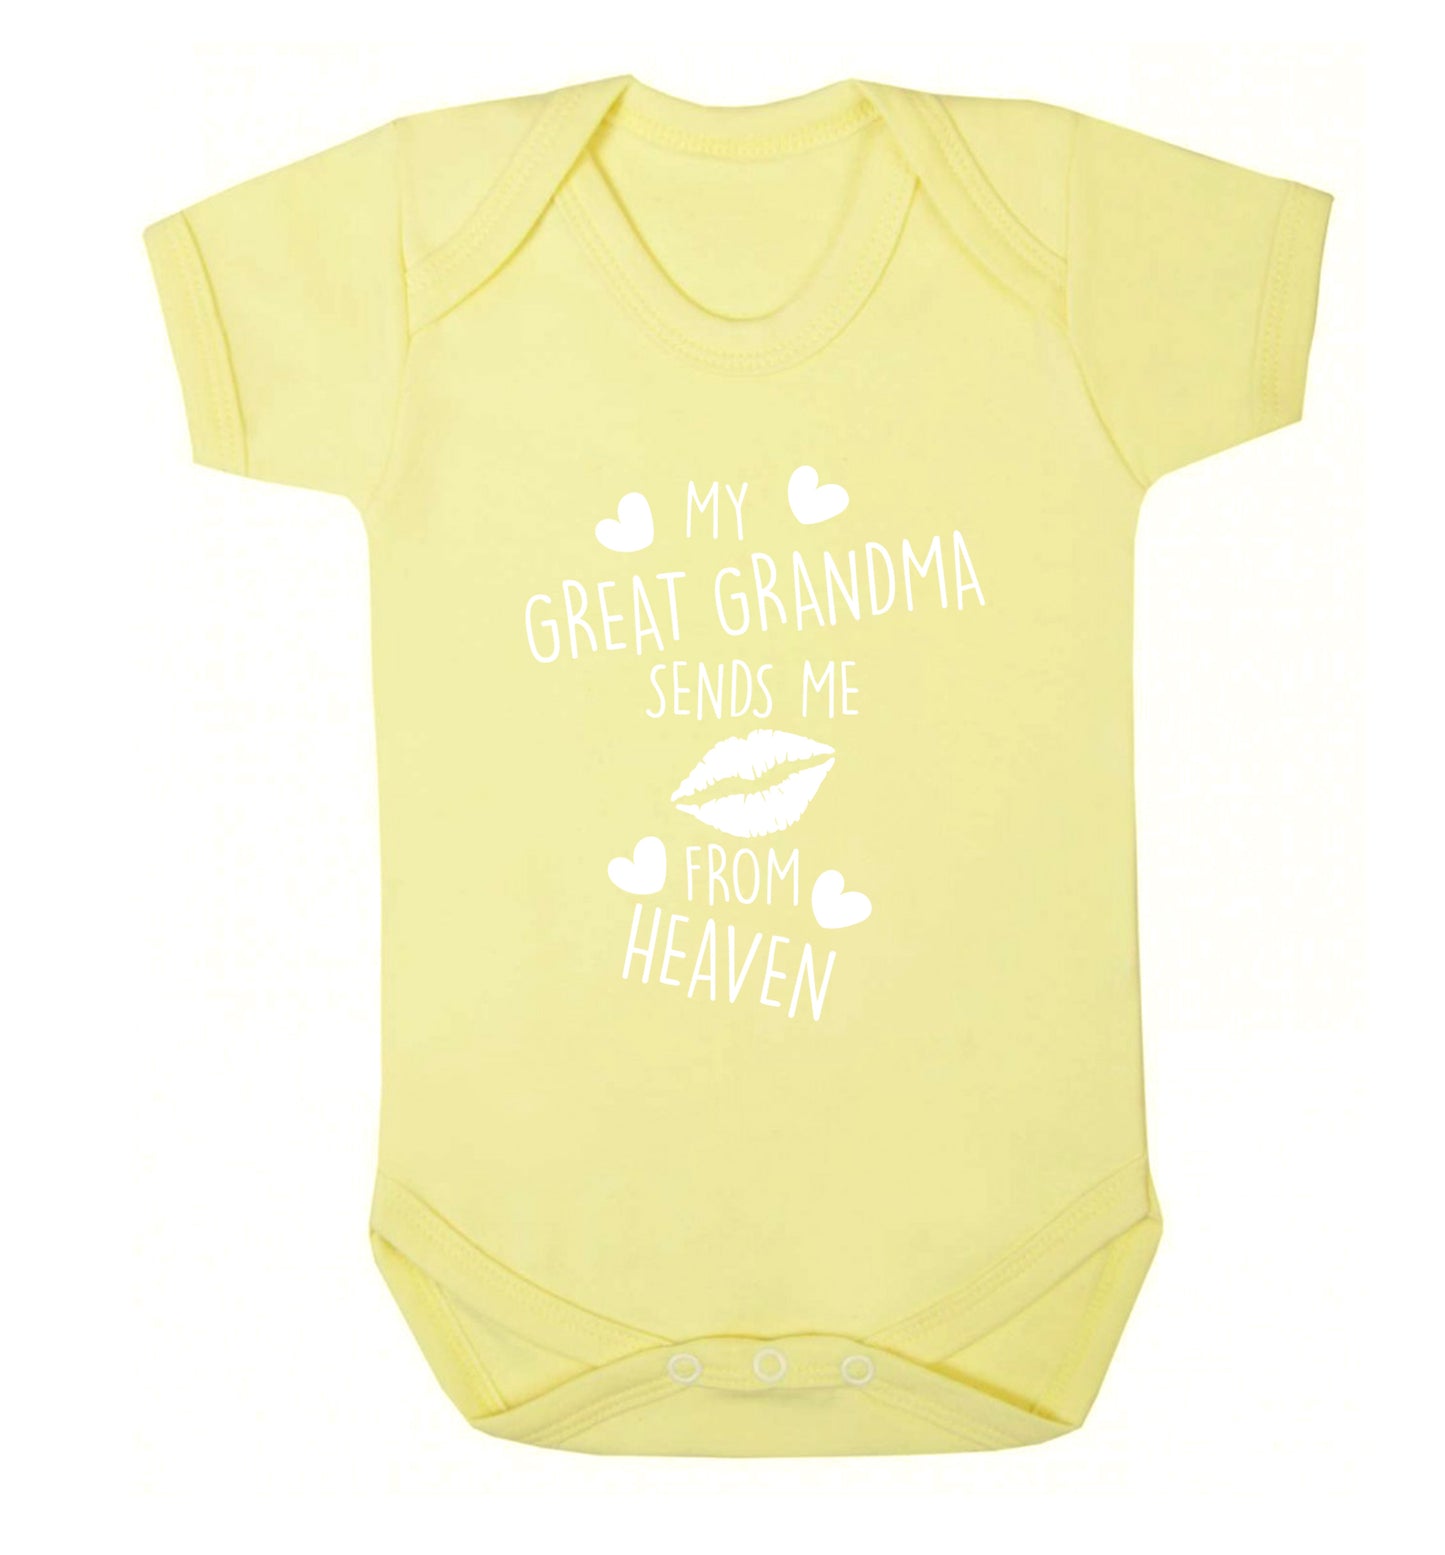 My great grandma sends me kisses from heaven Baby Vest pale yellow 18-24 months